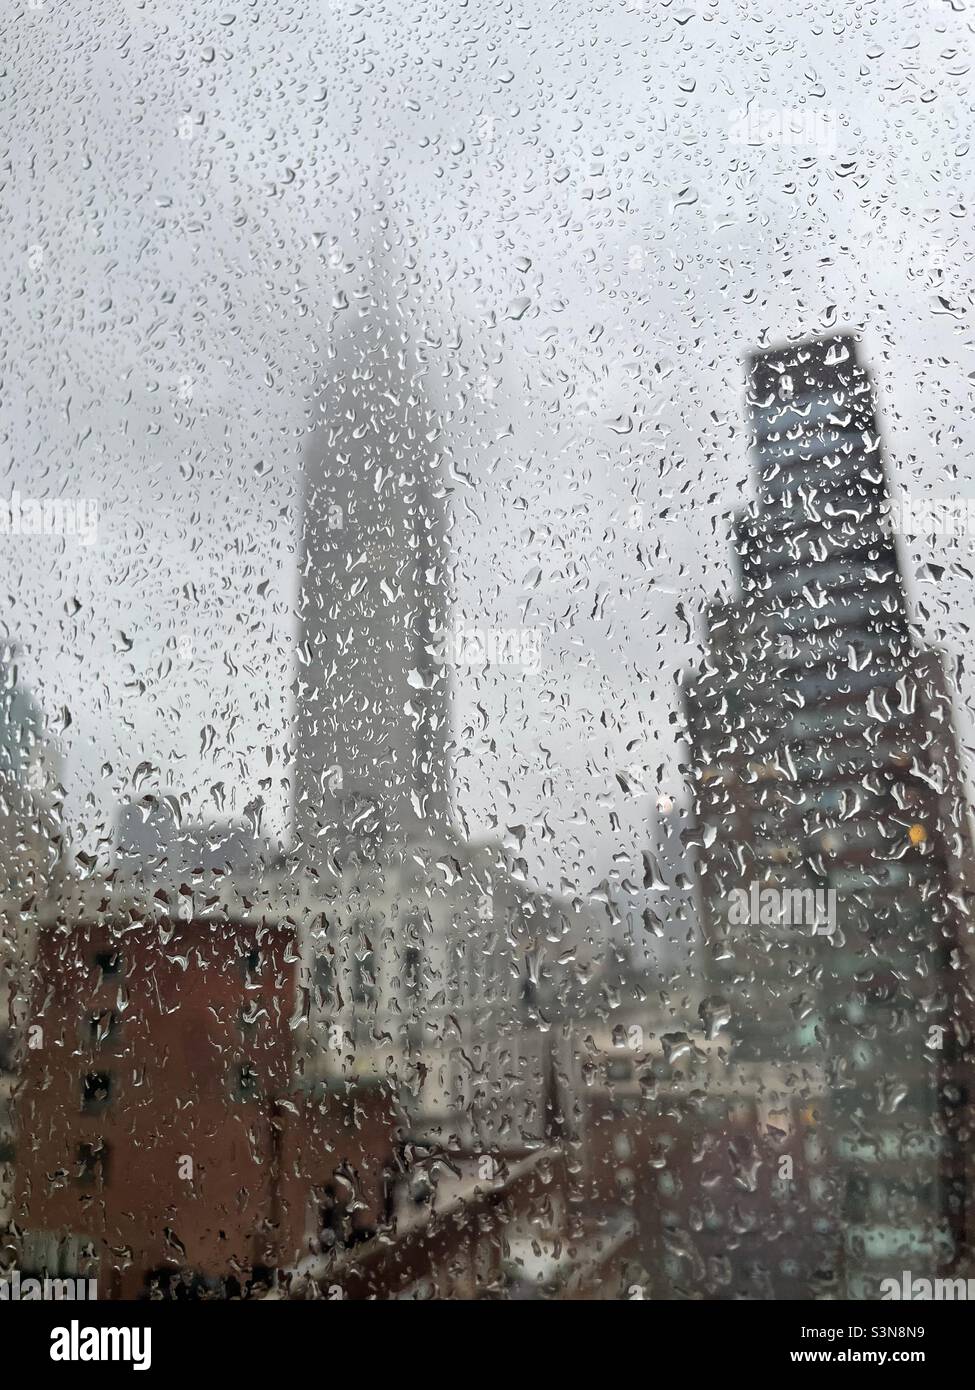 Empire State building shrouded in fog as viewed through a rain splattered window in New York City Stock Photo